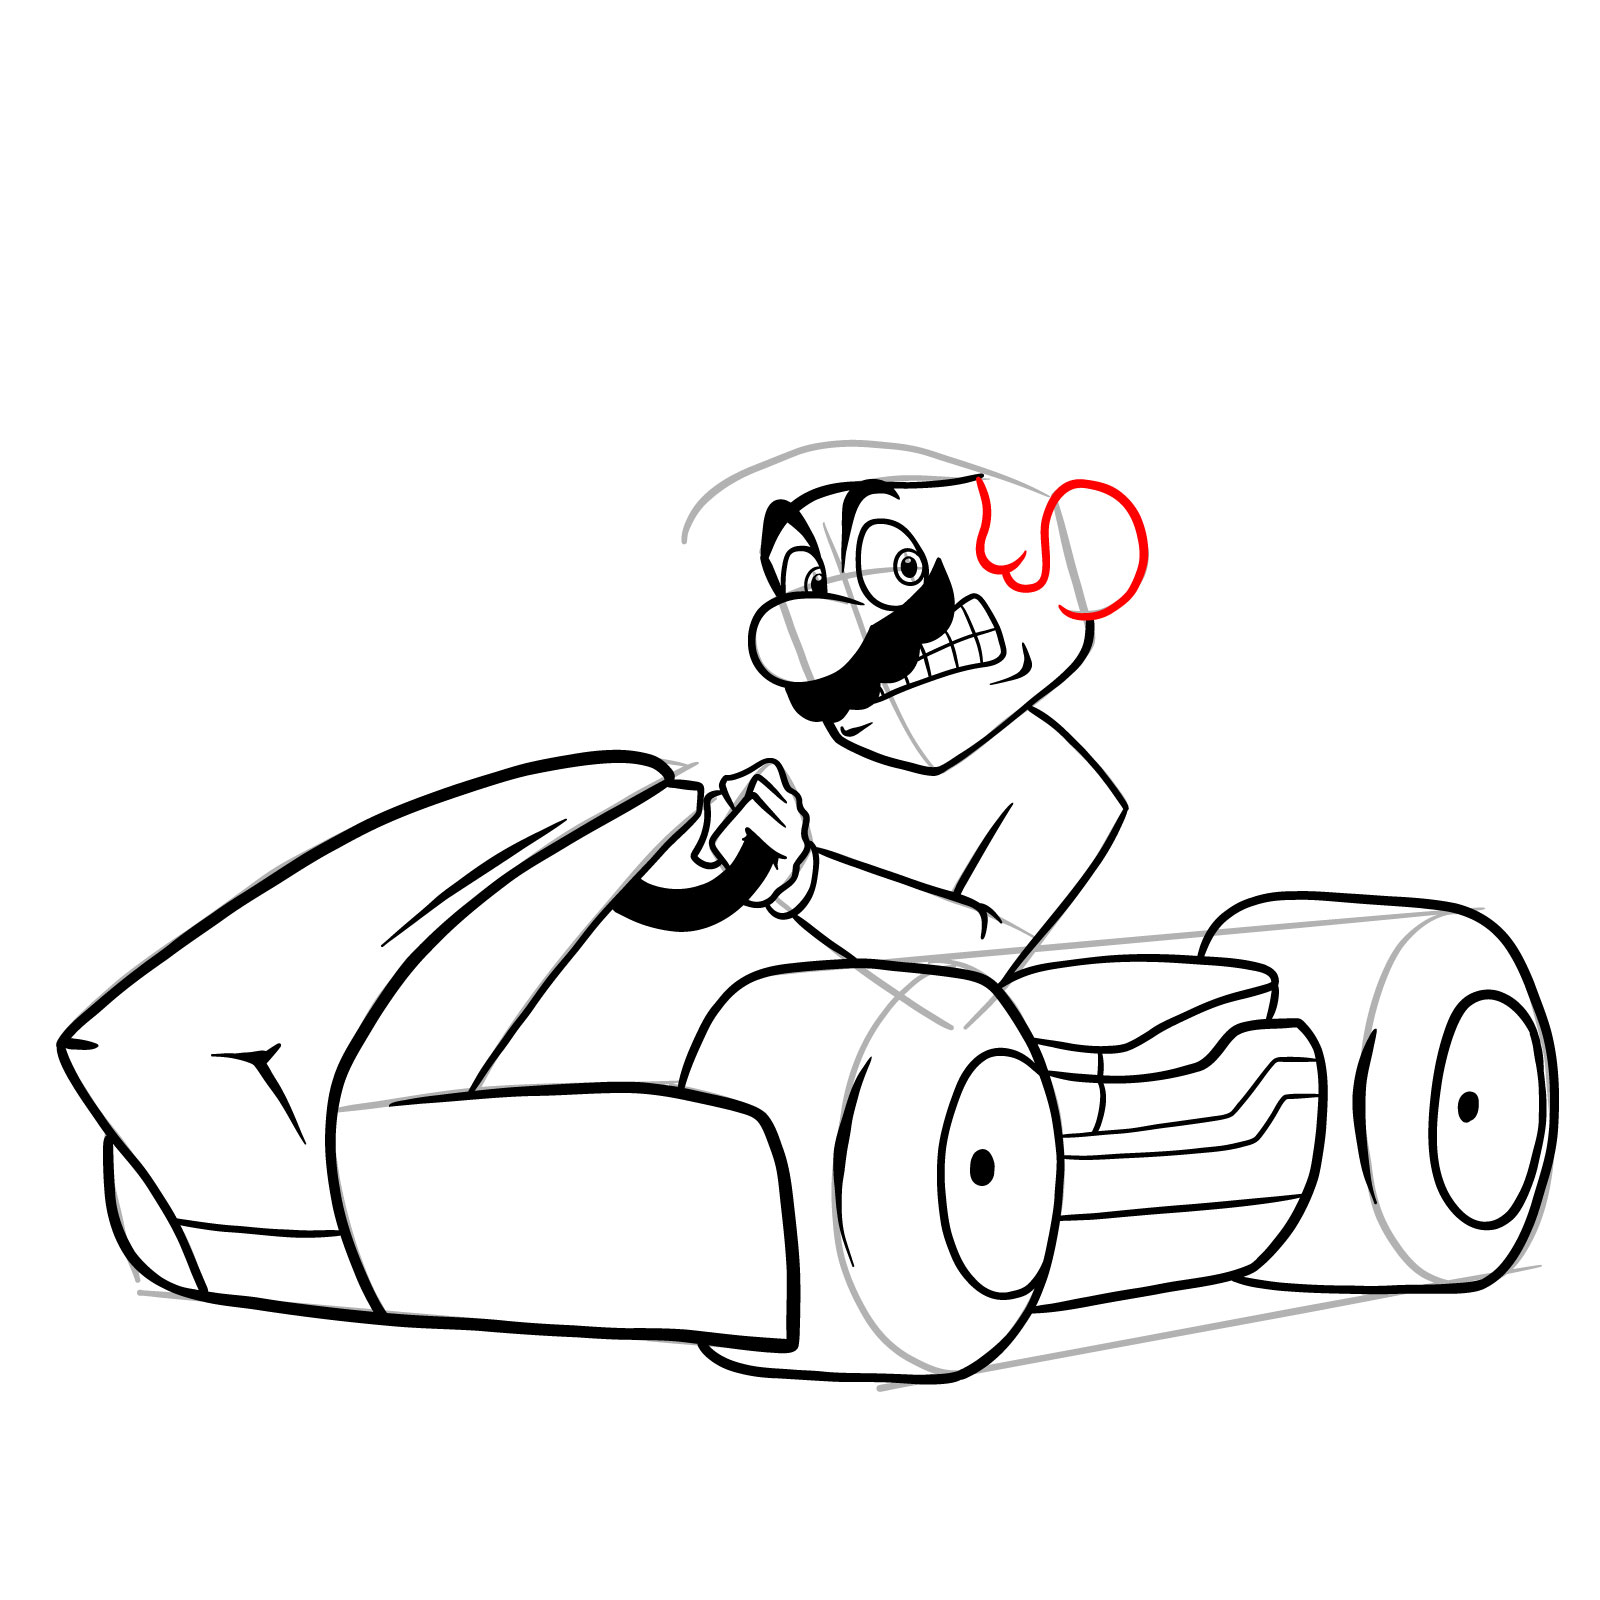 How to draw Race Traitors Mario - step 28